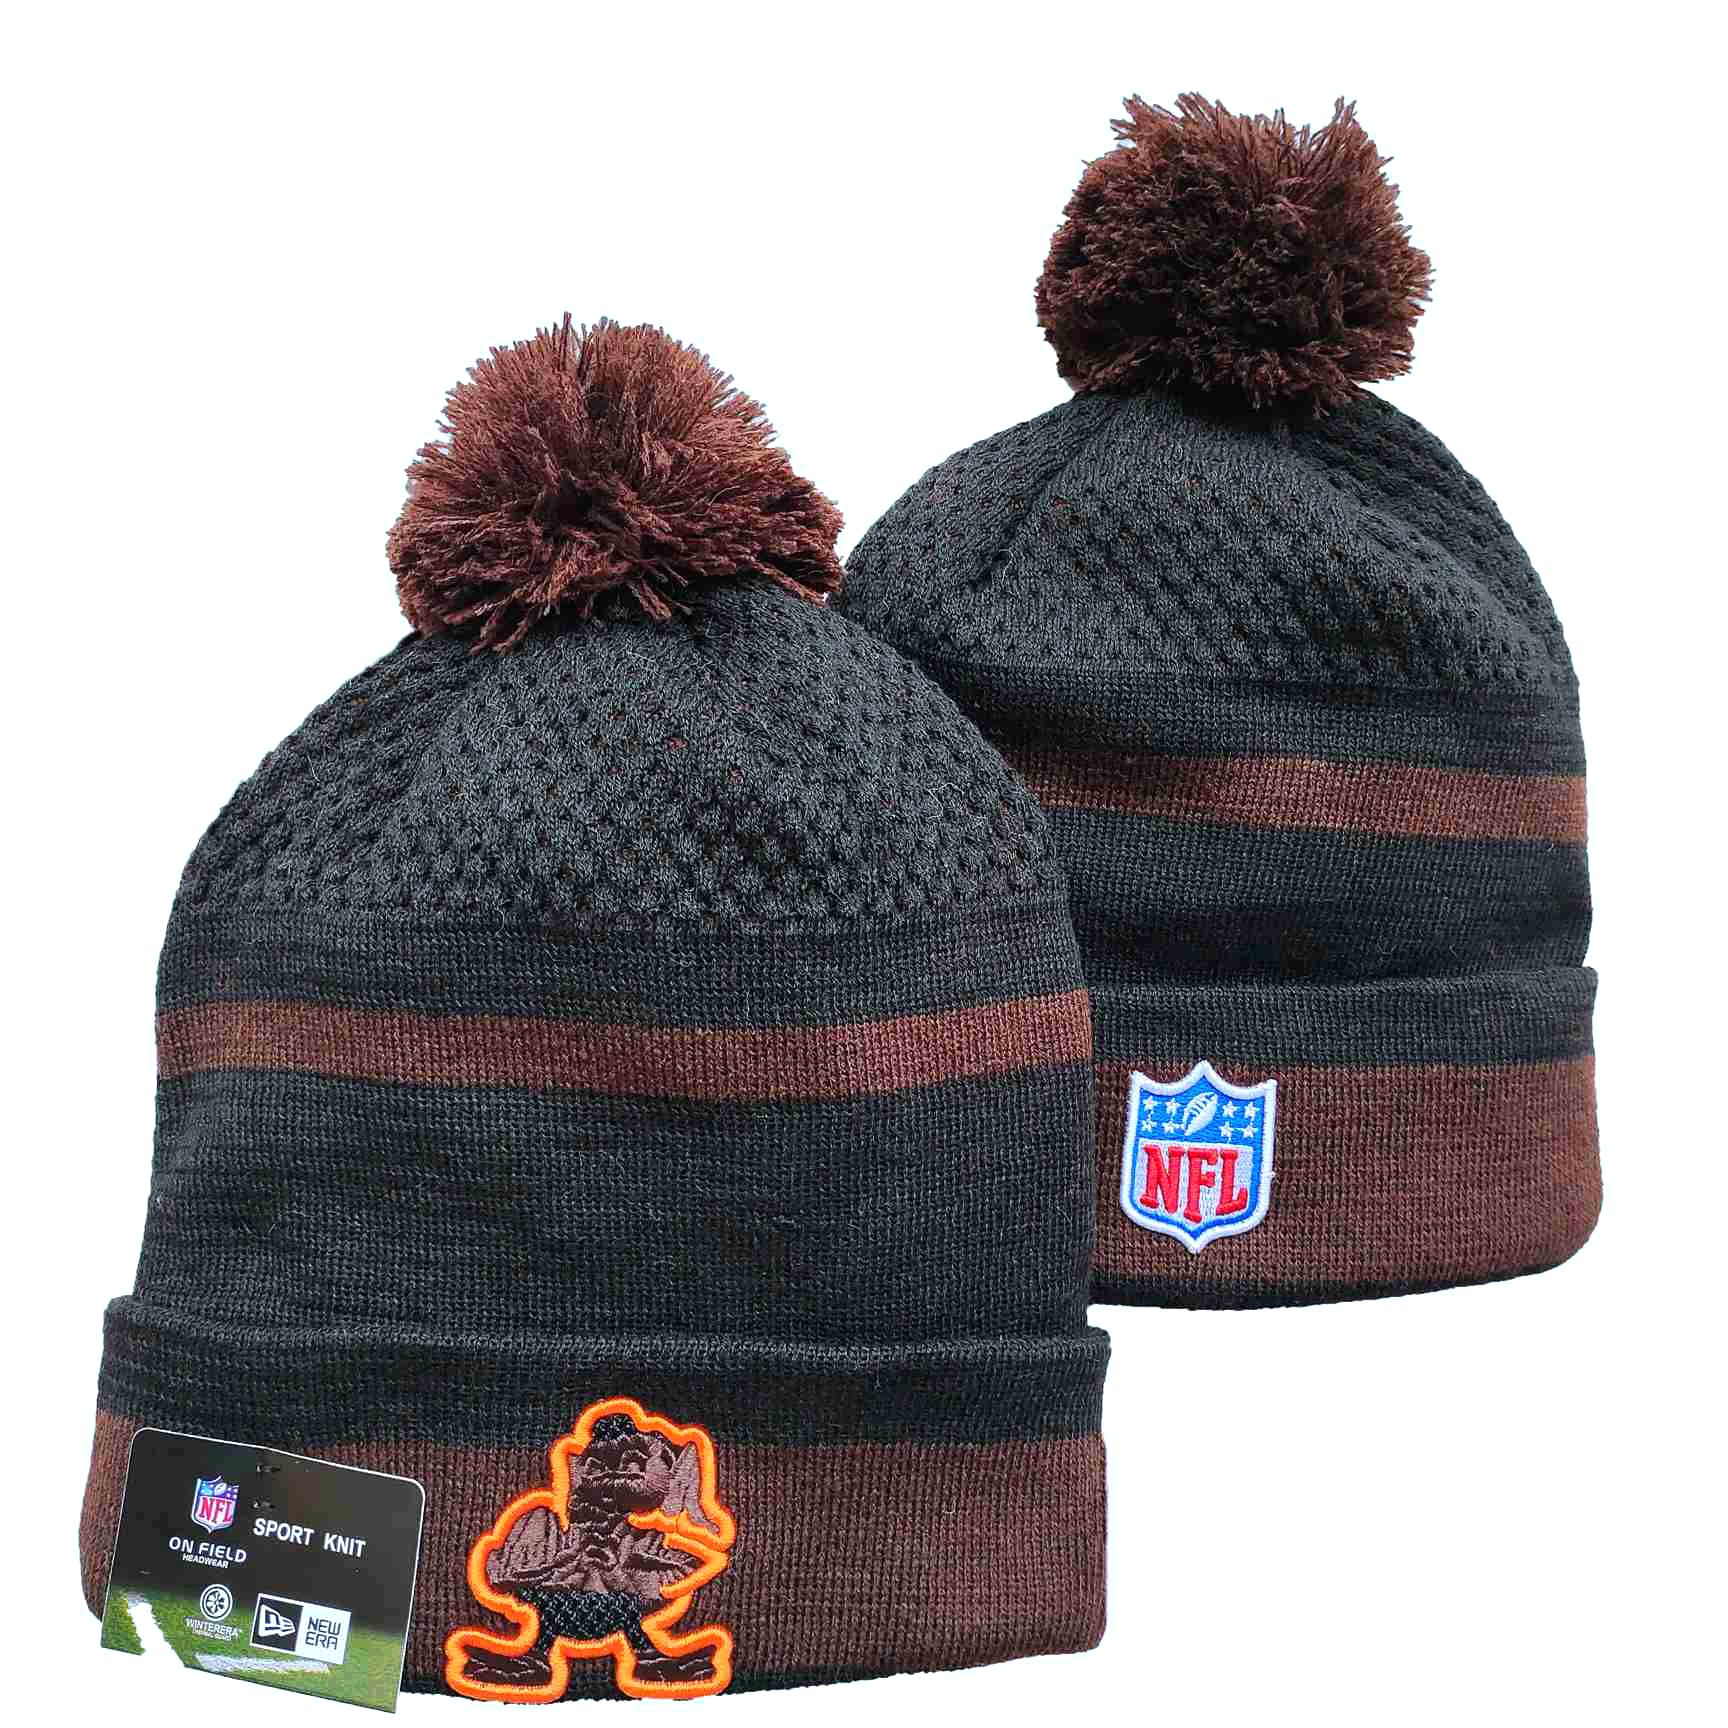 NFL Cleveland Browns Beanies Knit Hats-YD1297